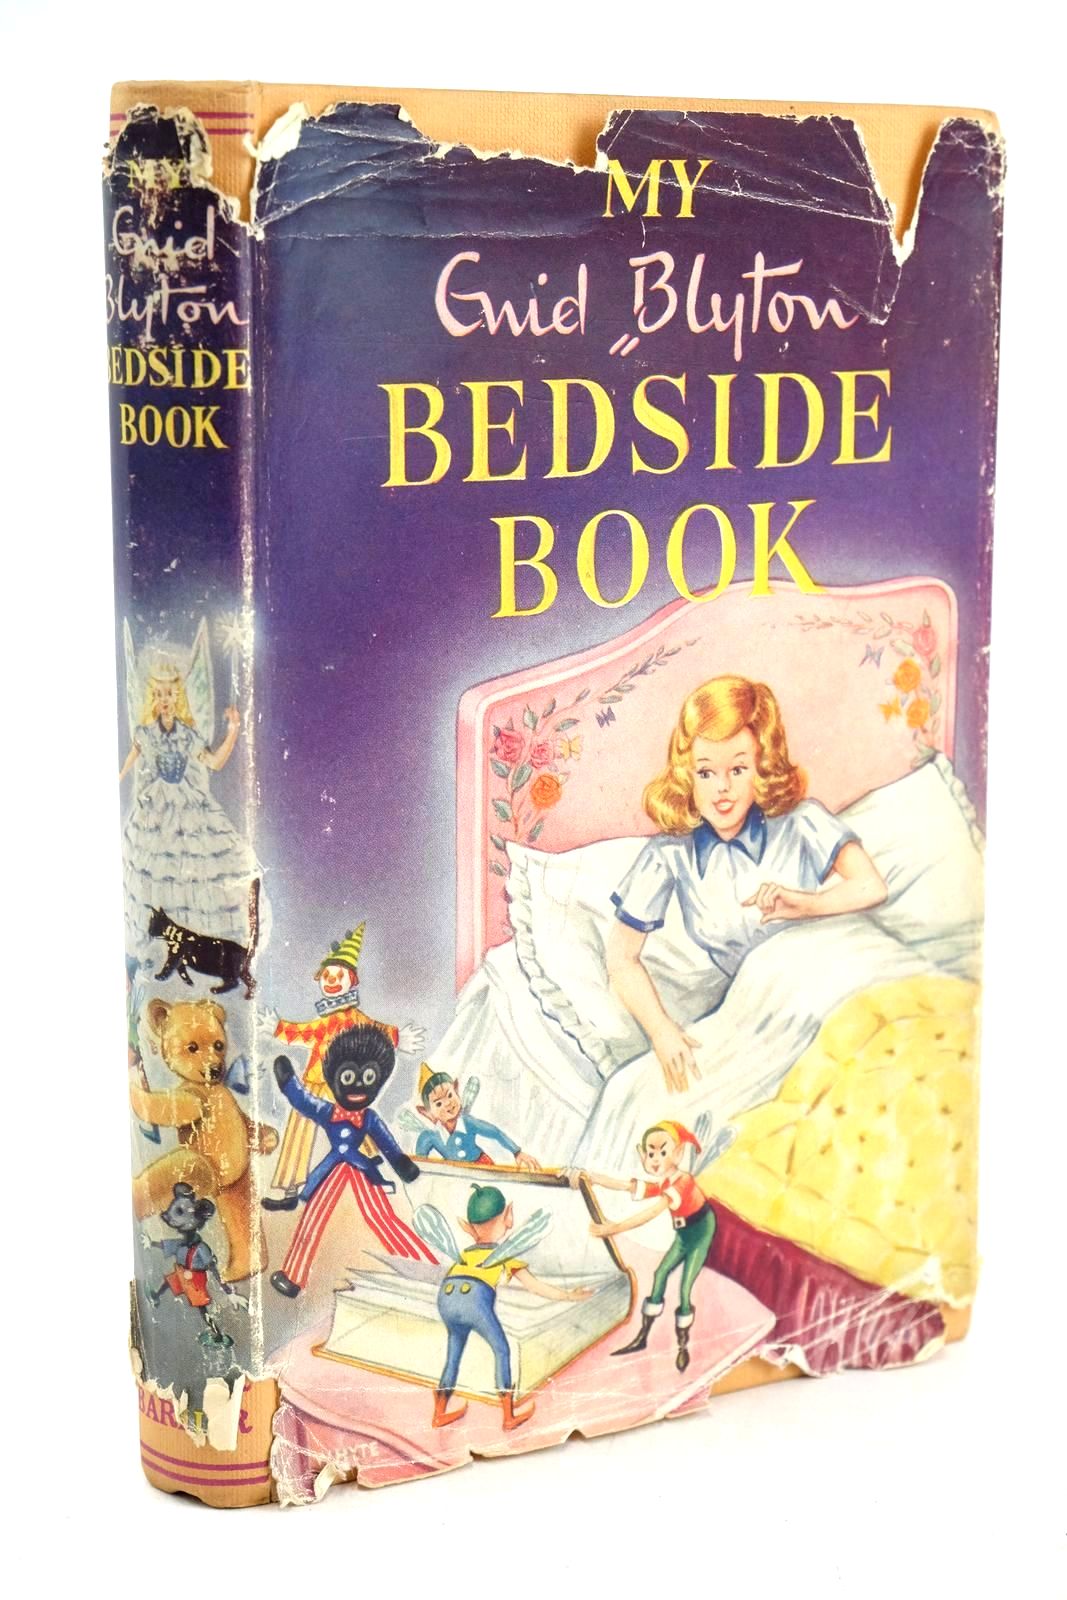 Photo of MY ENID BLYTON BEDSIDE BOOK written by Blyton, Enid published by Arthur Barker Ltd. (STOCK CODE: 1326789)  for sale by Stella & Rose's Books